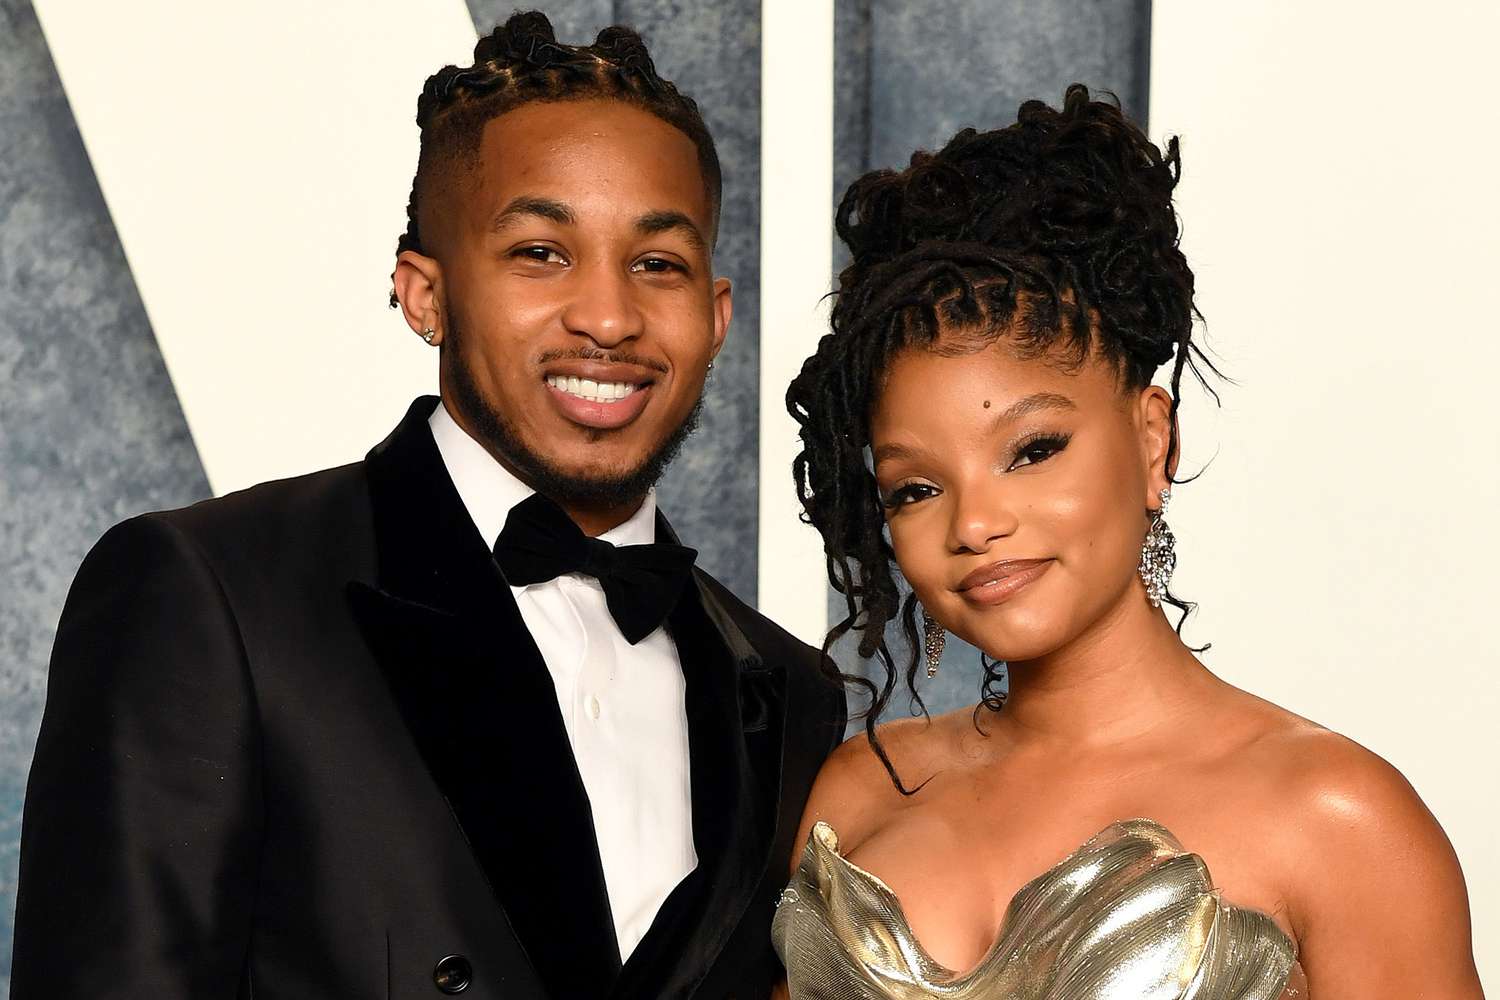 DDG and Halle Bailey attend the 2023 Vanity Fair Oscar Party Hosted By Radhika Jones at Wallis Annenberg Center for the Performing Arts on March 12, 2023 in Beverly Hills, California.